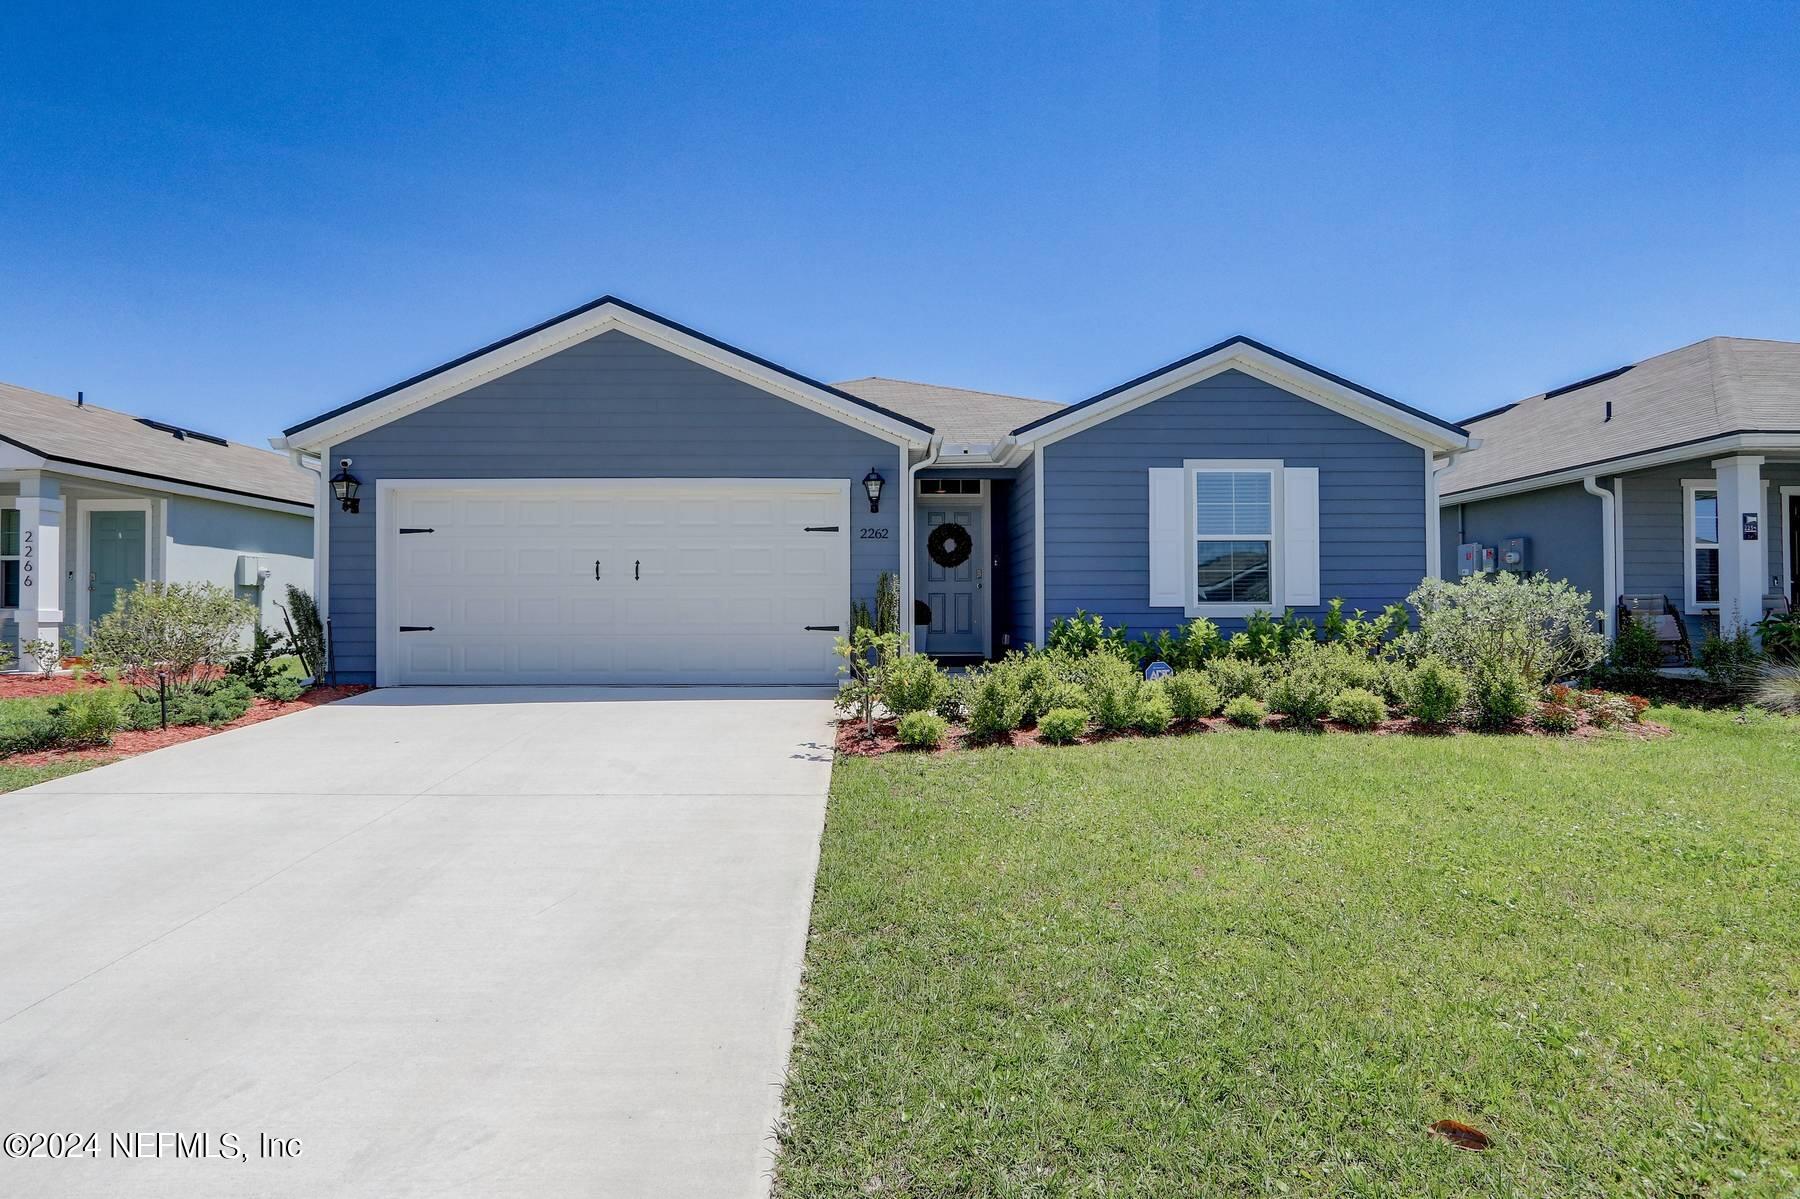 Green Cove Springs, FL home for sale located at 2262 Willow Glen Lane, Green Cove Springs, FL 32043